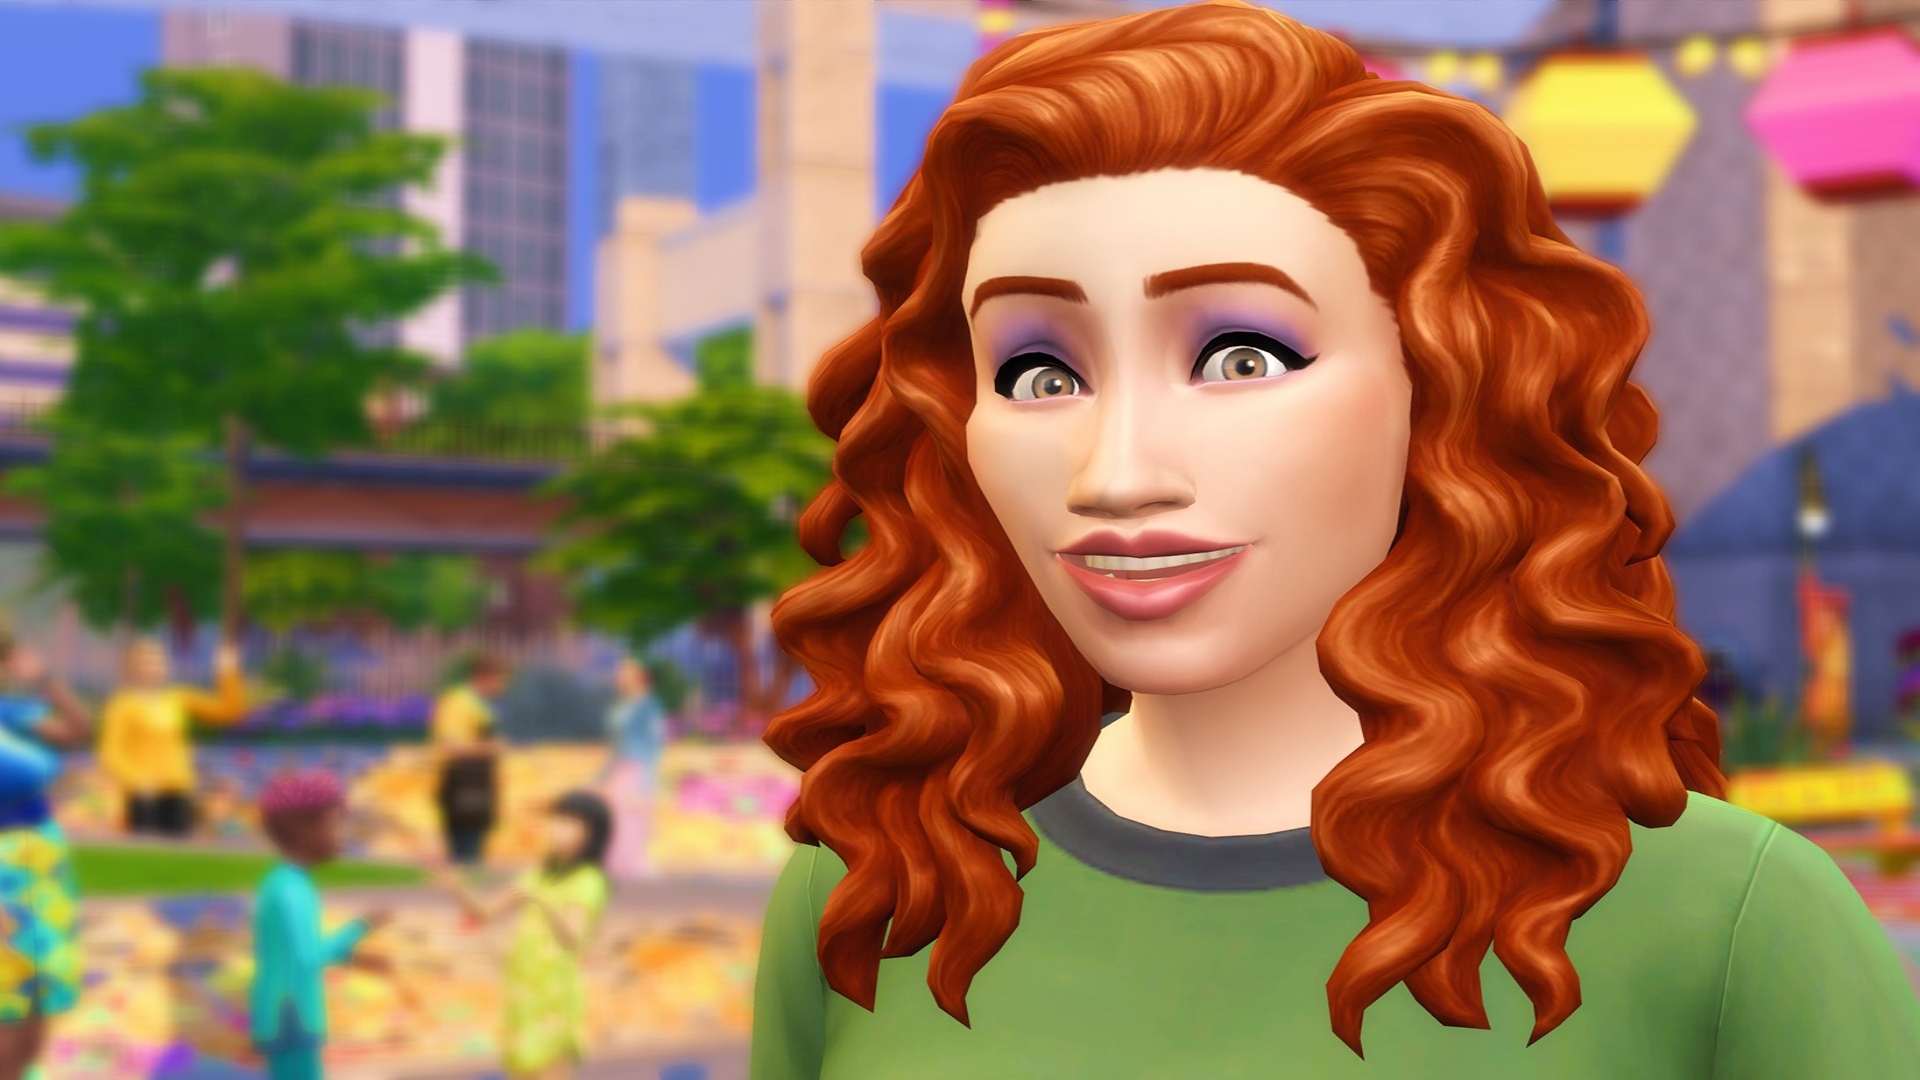 Sims 4 uses “psychological profiling” to pick what DLC you should buy